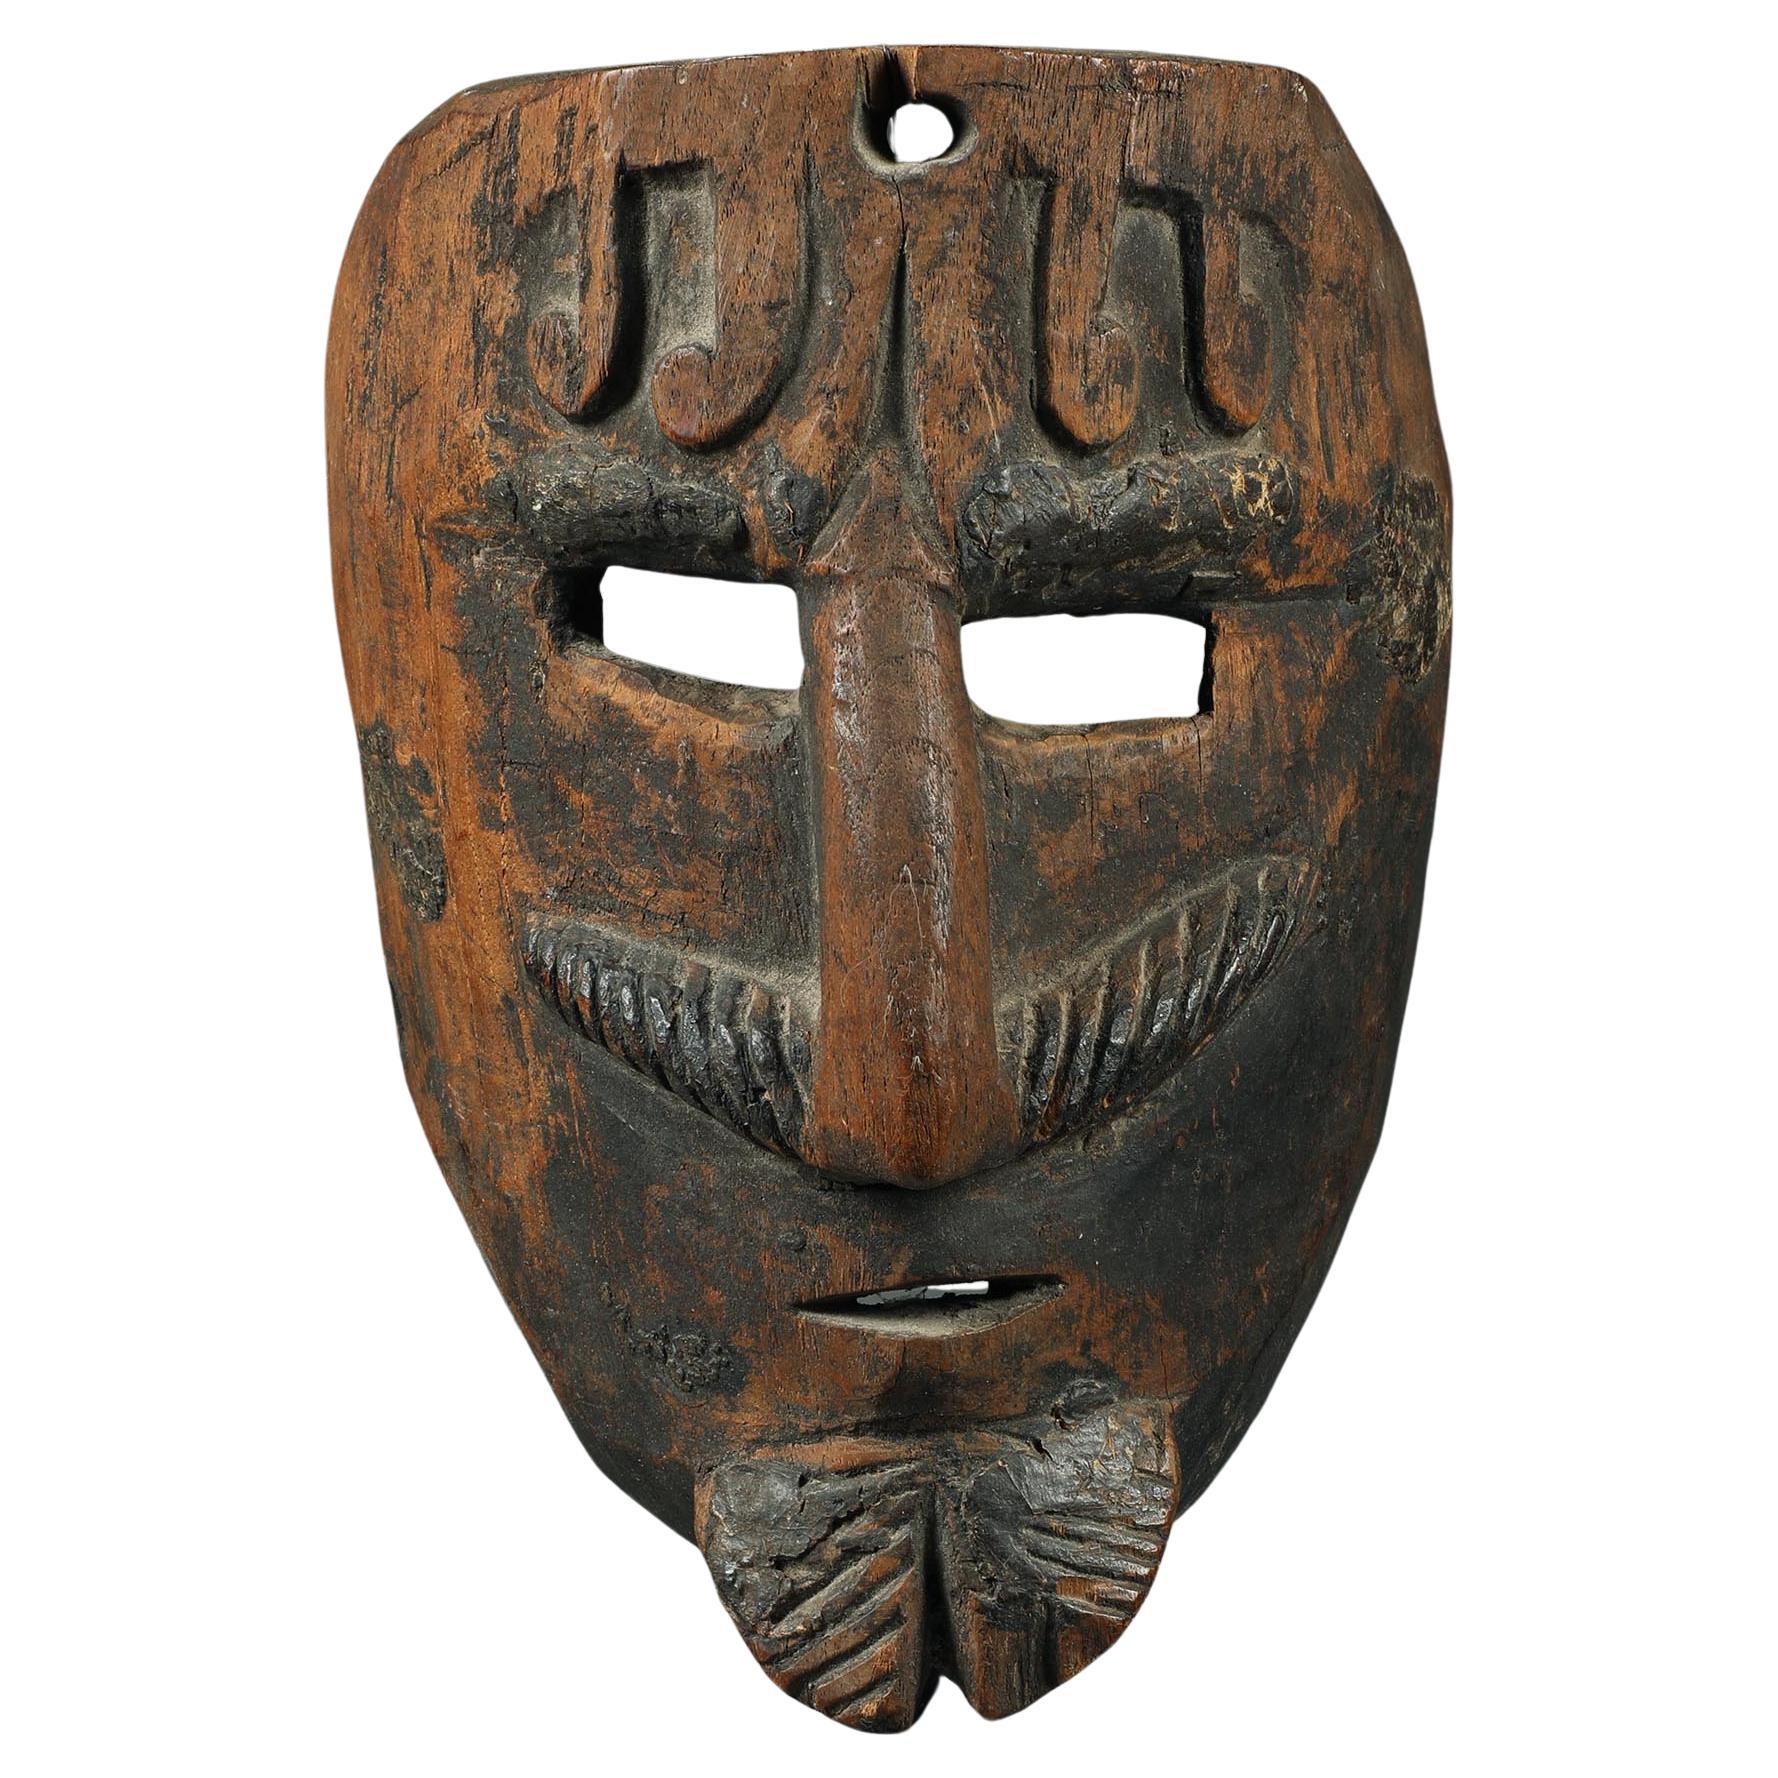 Early Hardwood Mexican Mask, Man With Moustache and Beard early 20th century